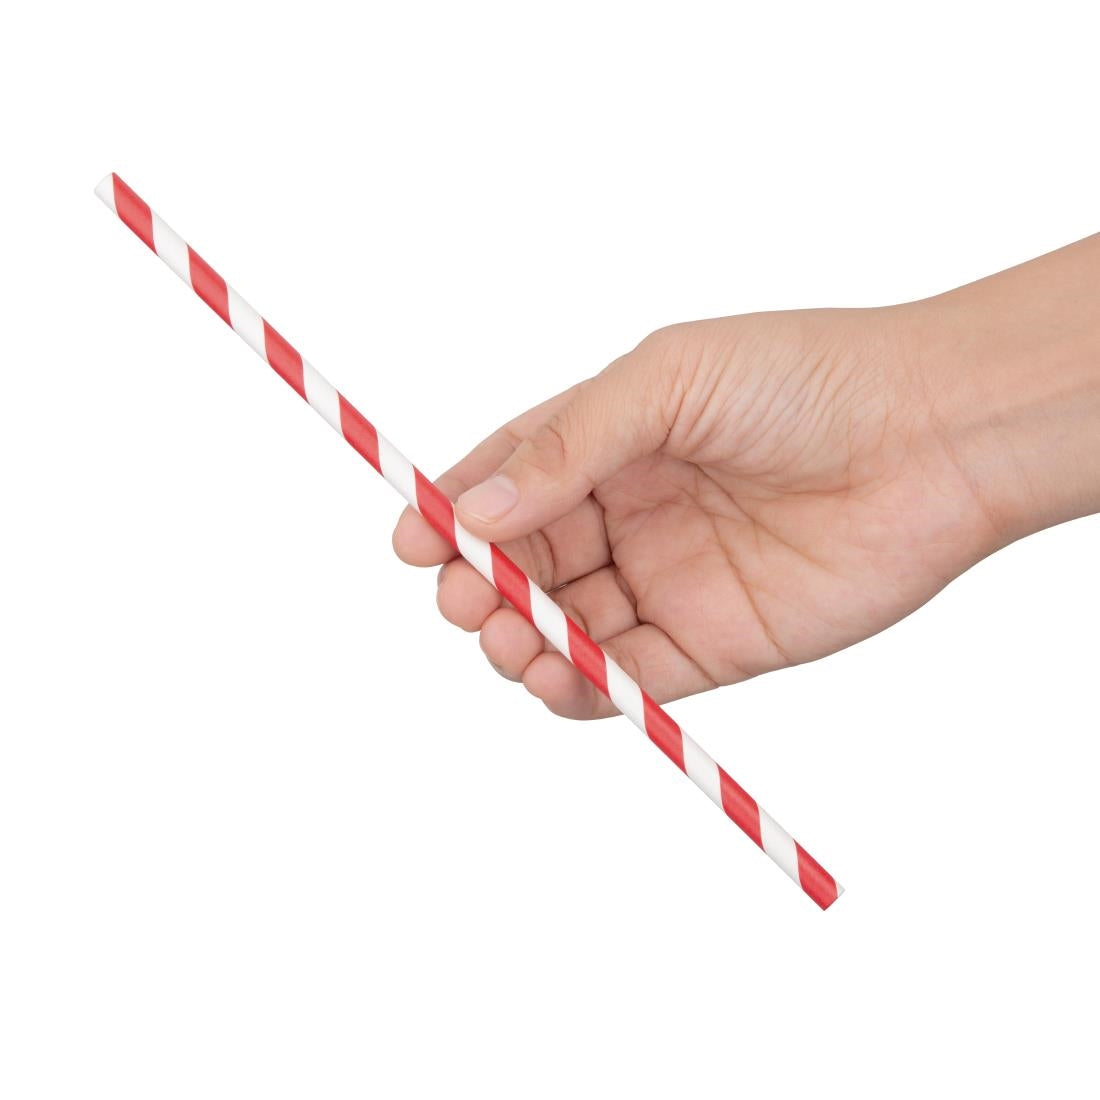 FP442 Fiesta Green Individually Wrapped Compostable Paper Straws Red Stripes (Pack of 250) JD Catering Equipment Solutions Ltd